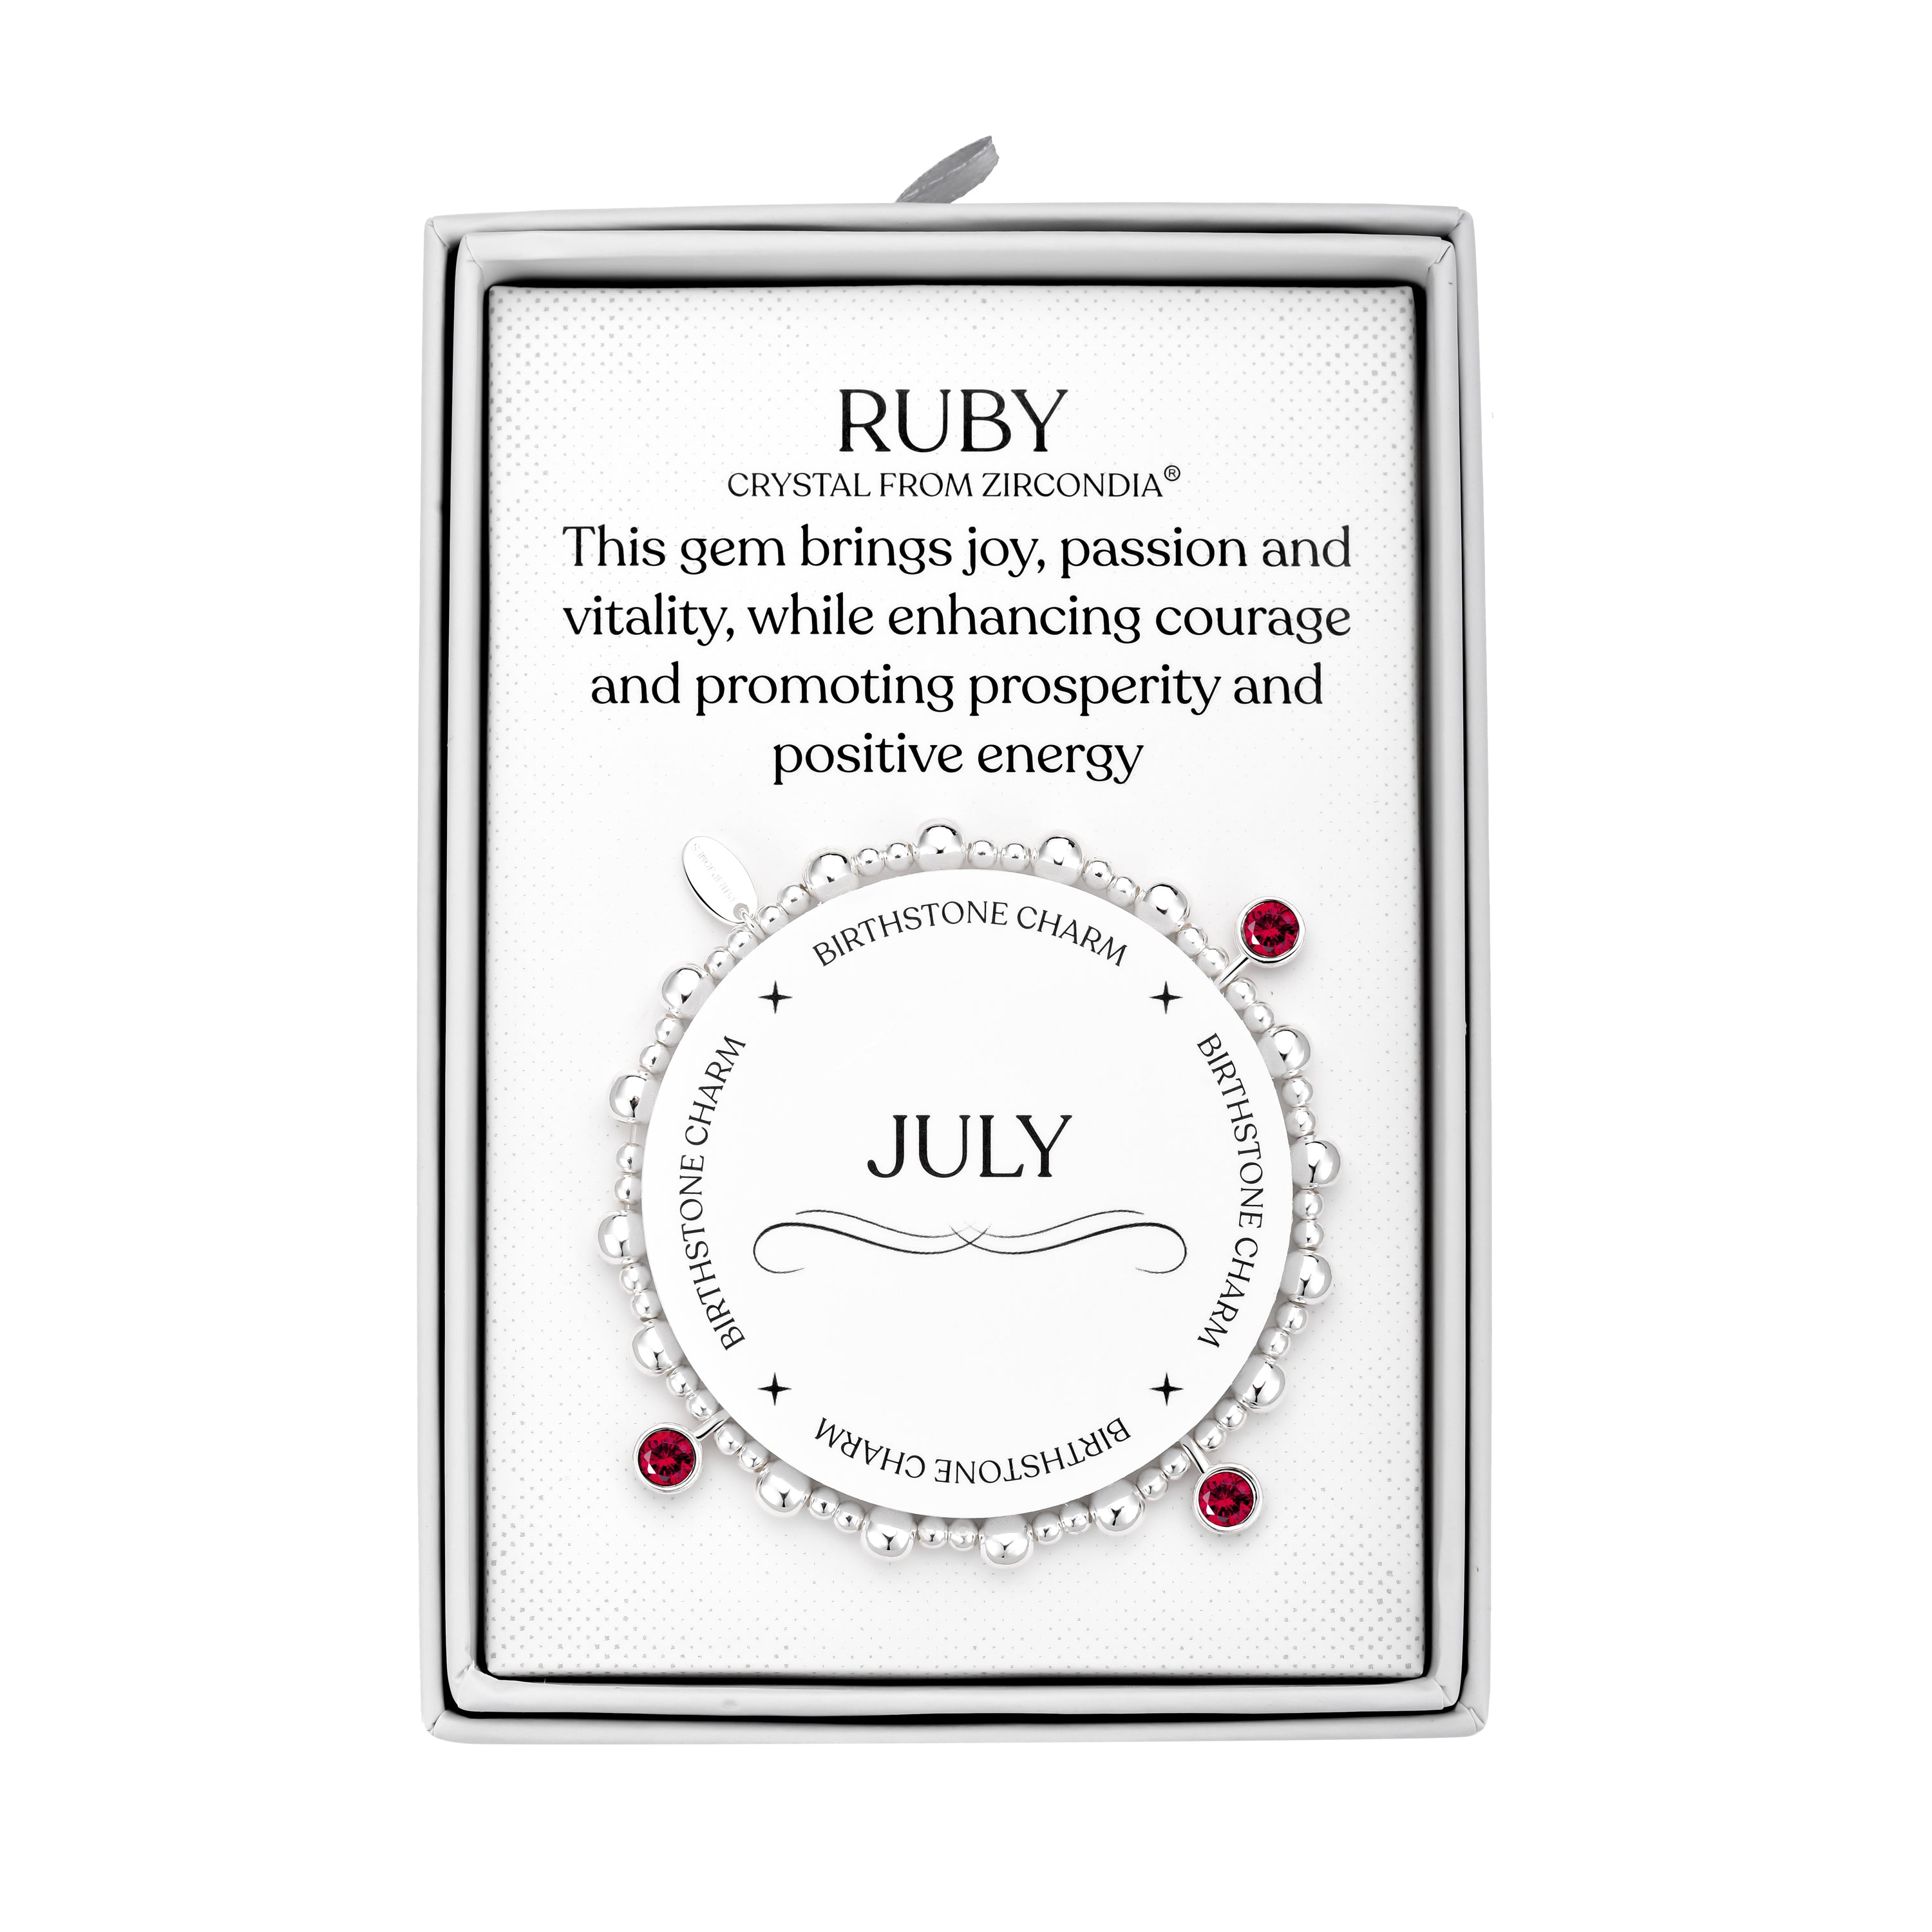 July (Ruby) Birthstone Stretch Charm Bracelet with Quote Gift Box by Philip Jones Jewellery